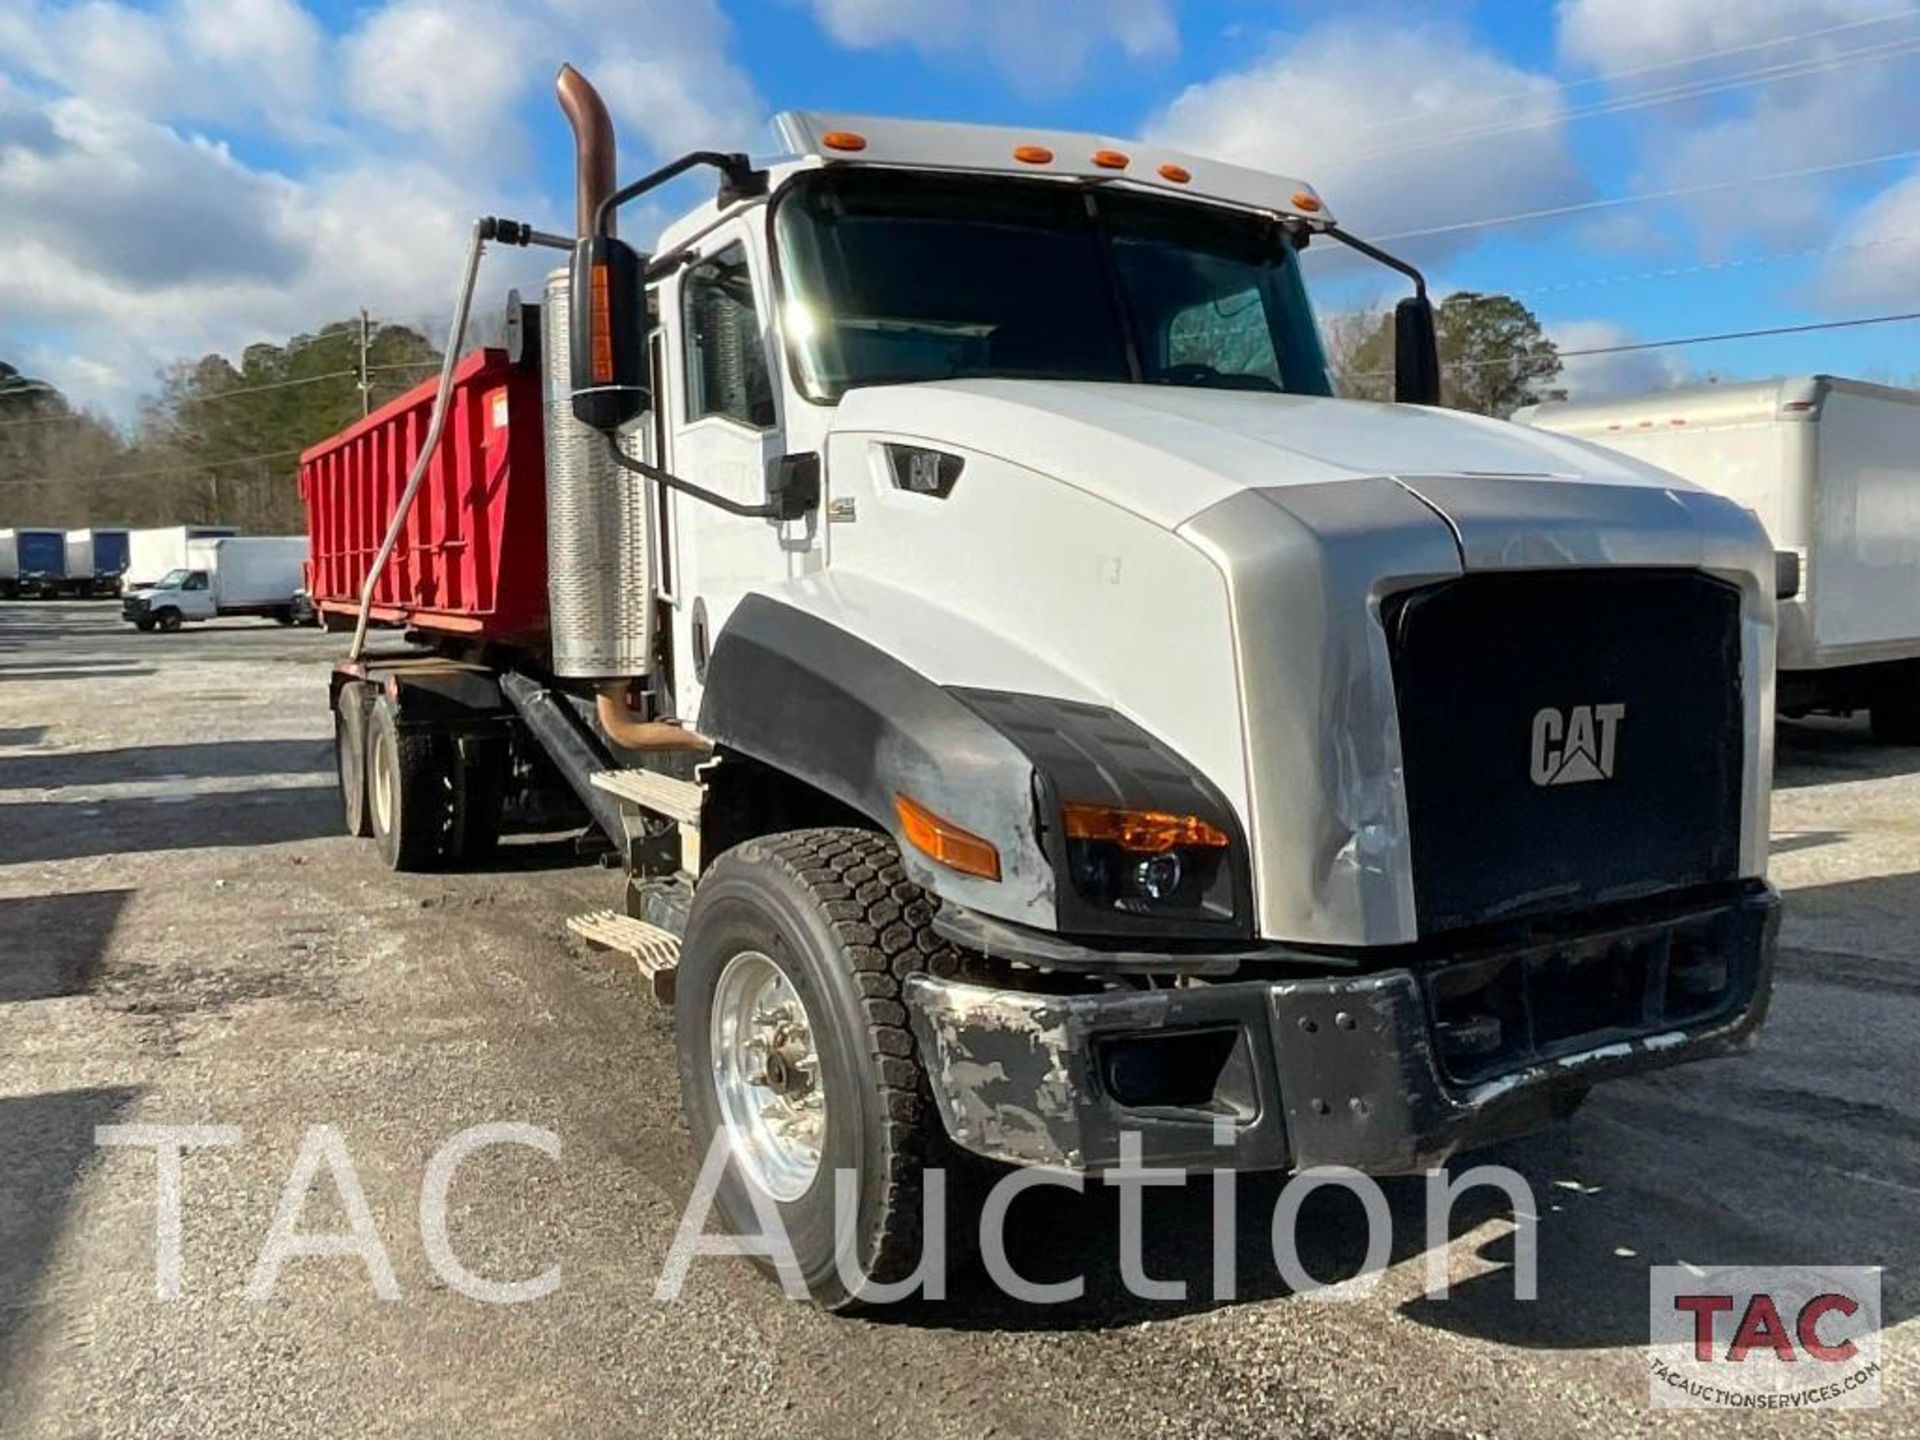 2012 CAT CT660S Roll-Off Truck W/ 20yd Dumpster - Image 2 of 148